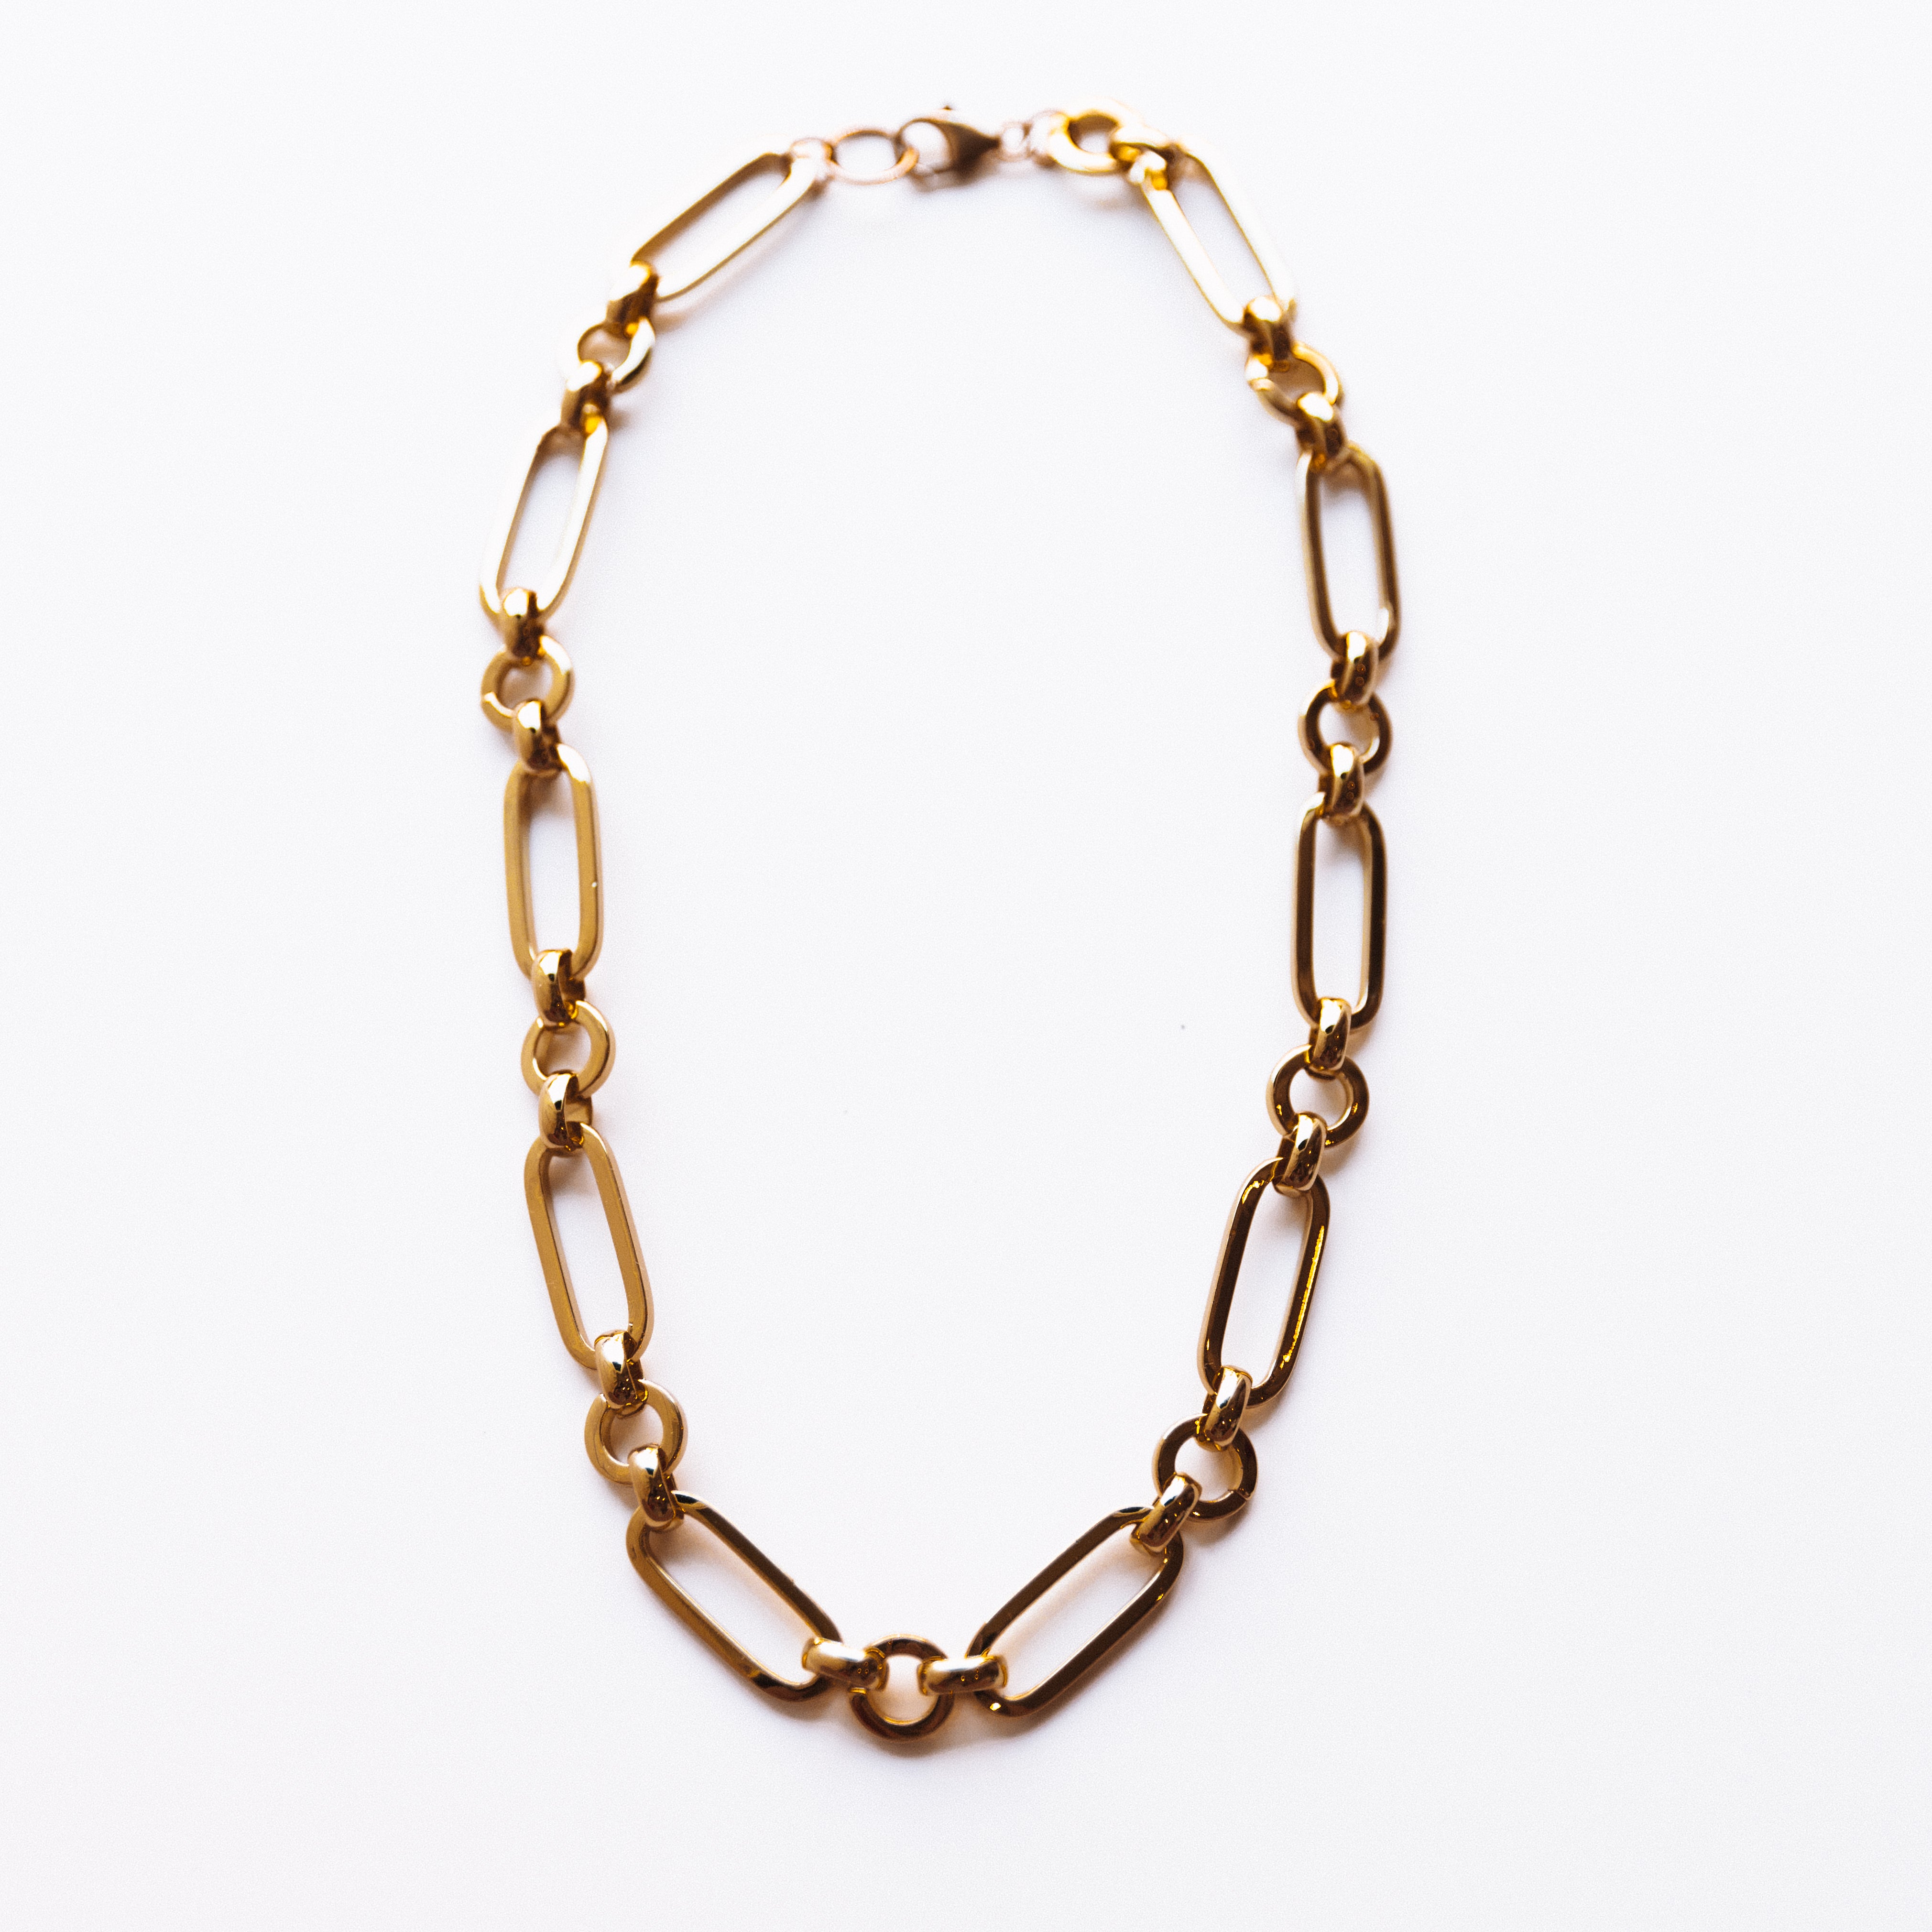 The Aisle Statement Necklace – Jay Nicole Designs